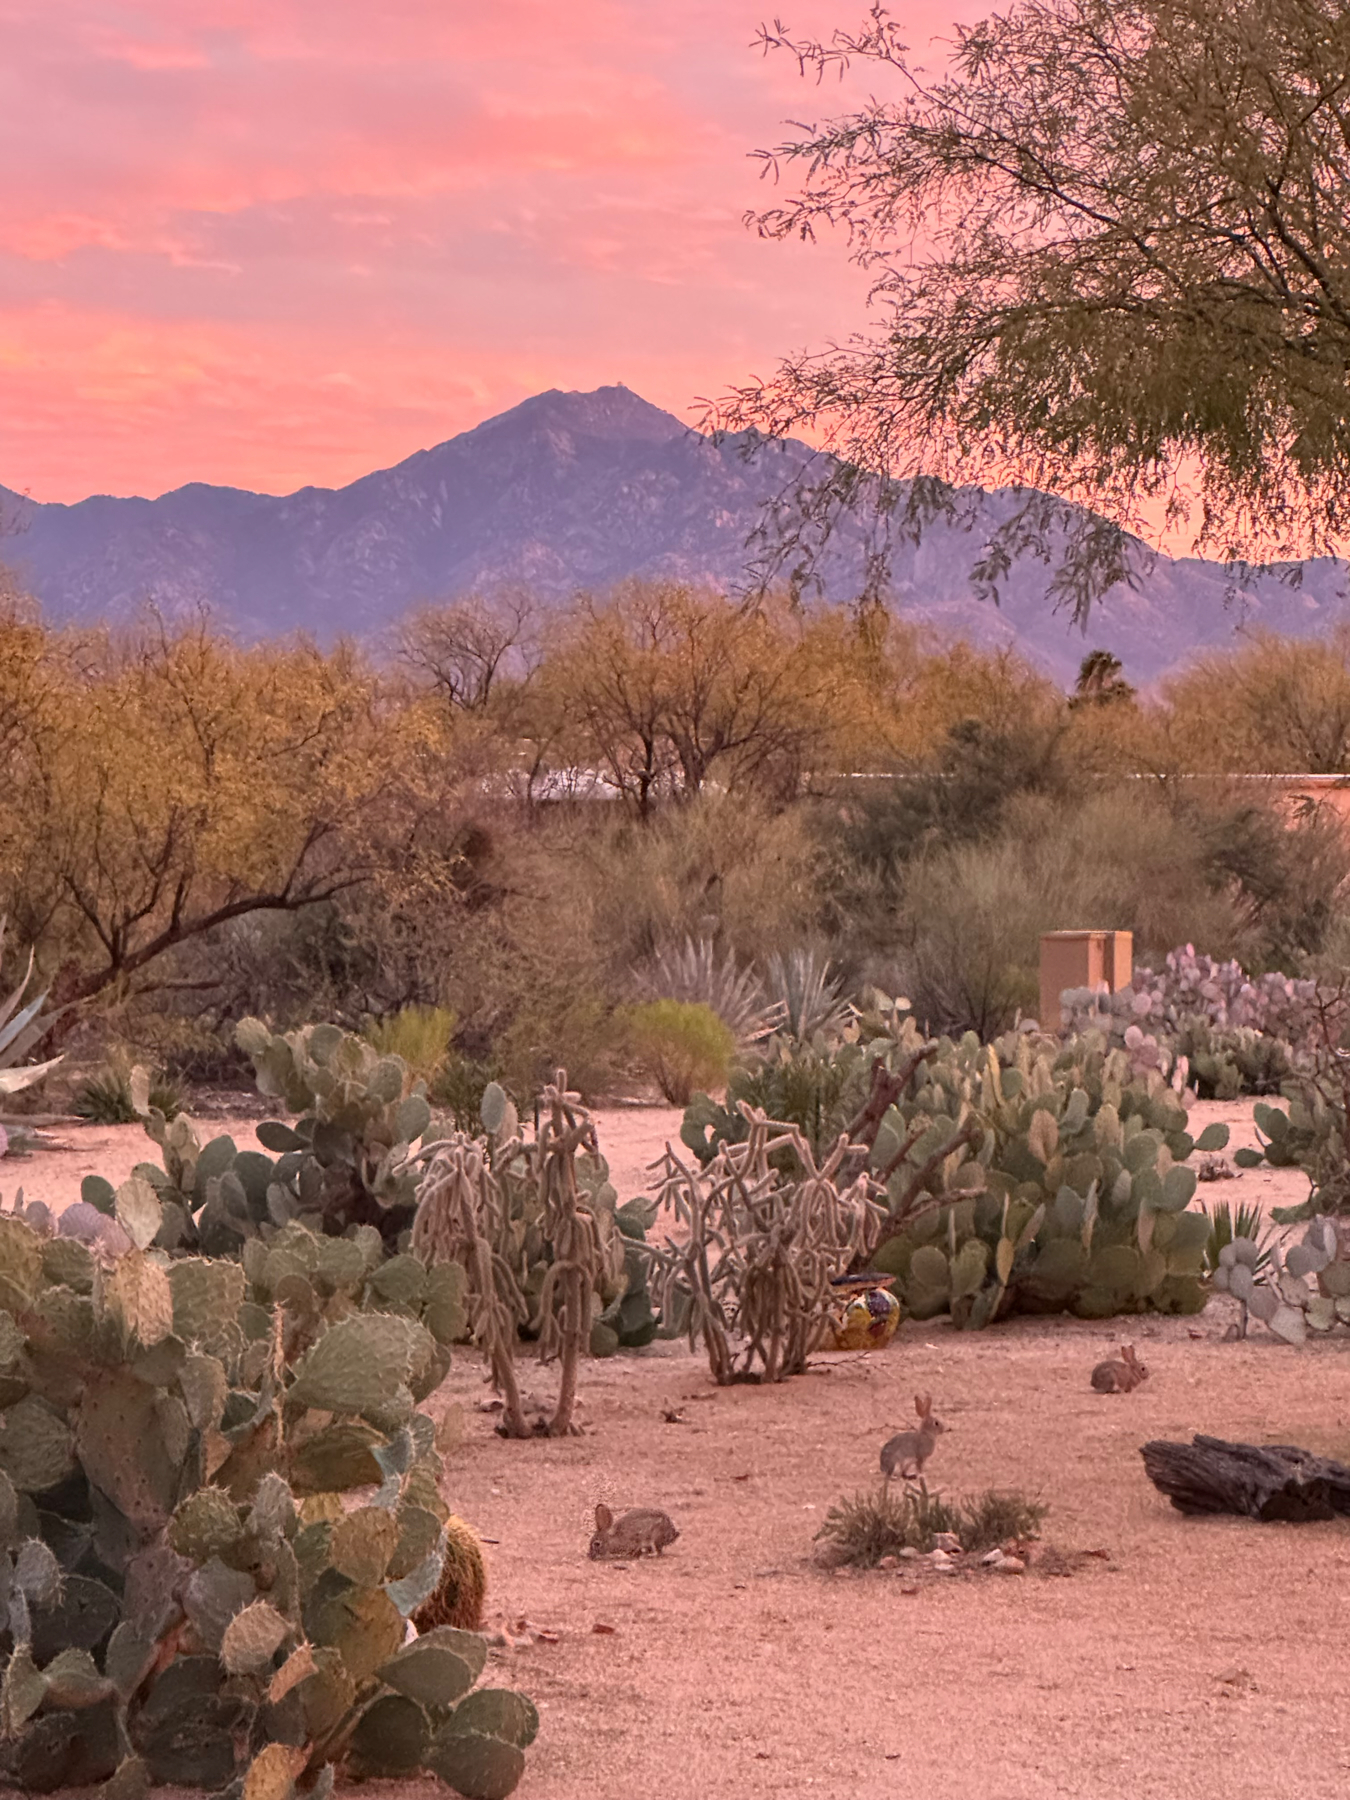 A desert landscape at sunset with a pink and orange sky, mountains in the background, and various types of cacti and desert vegetation in the foreground. Several rabbits are visible among the plants.